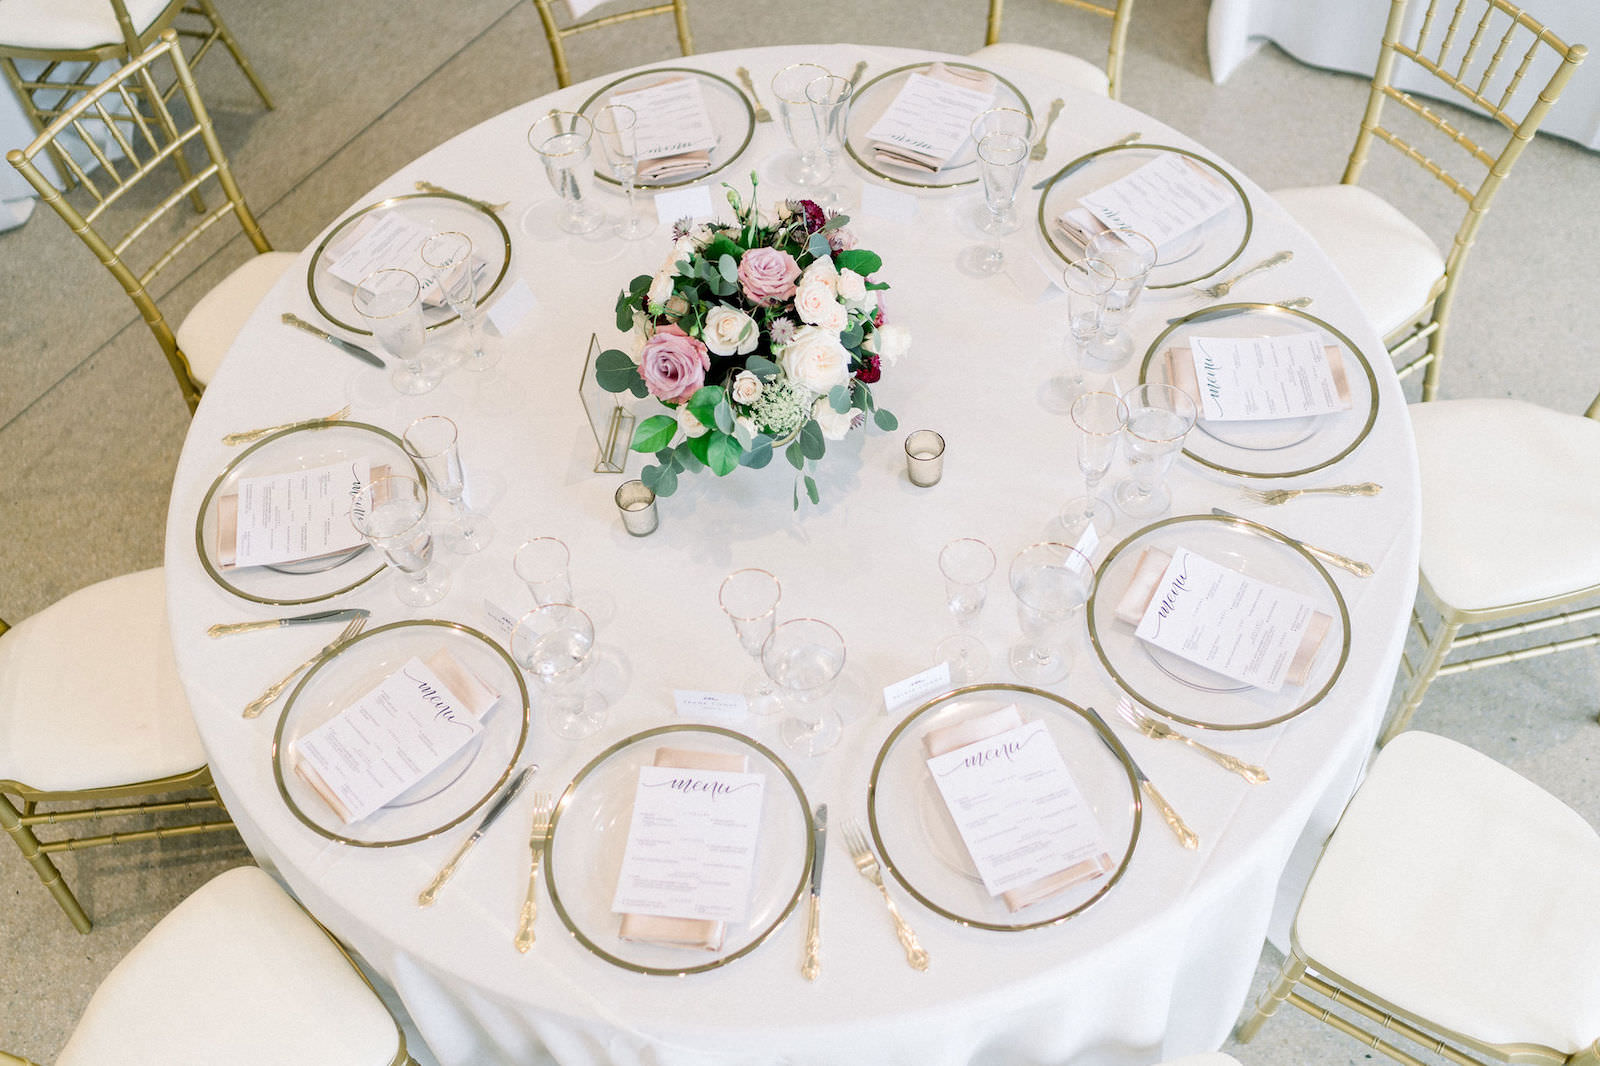 Wedding Reception Table with White Linen Tablecloth and Clear Glass Charger Plates with Gold Rim and Gold Rimmed Glasses and Gold Chiavari Chairs | White Blush Pink and Maroon Red Roses Centerpiece with Eucalyptus Greenery